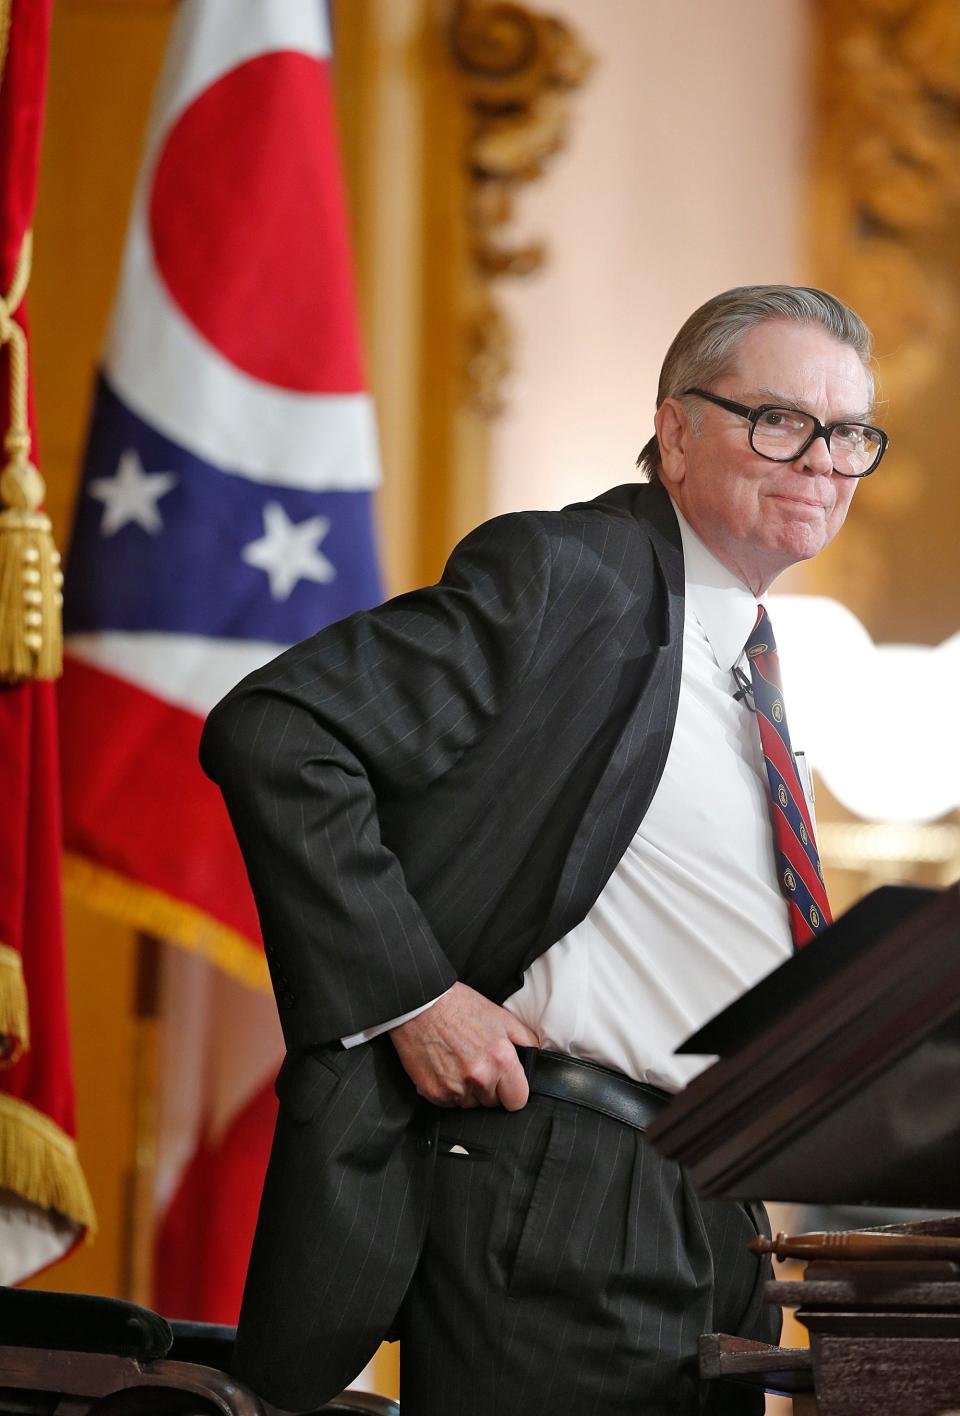 House Speaker William G. Batchelder looks out upon the House floor during debate at his final session on Dec. 17, 2014. In all, Batchelder served 38 years in the Ohio House.